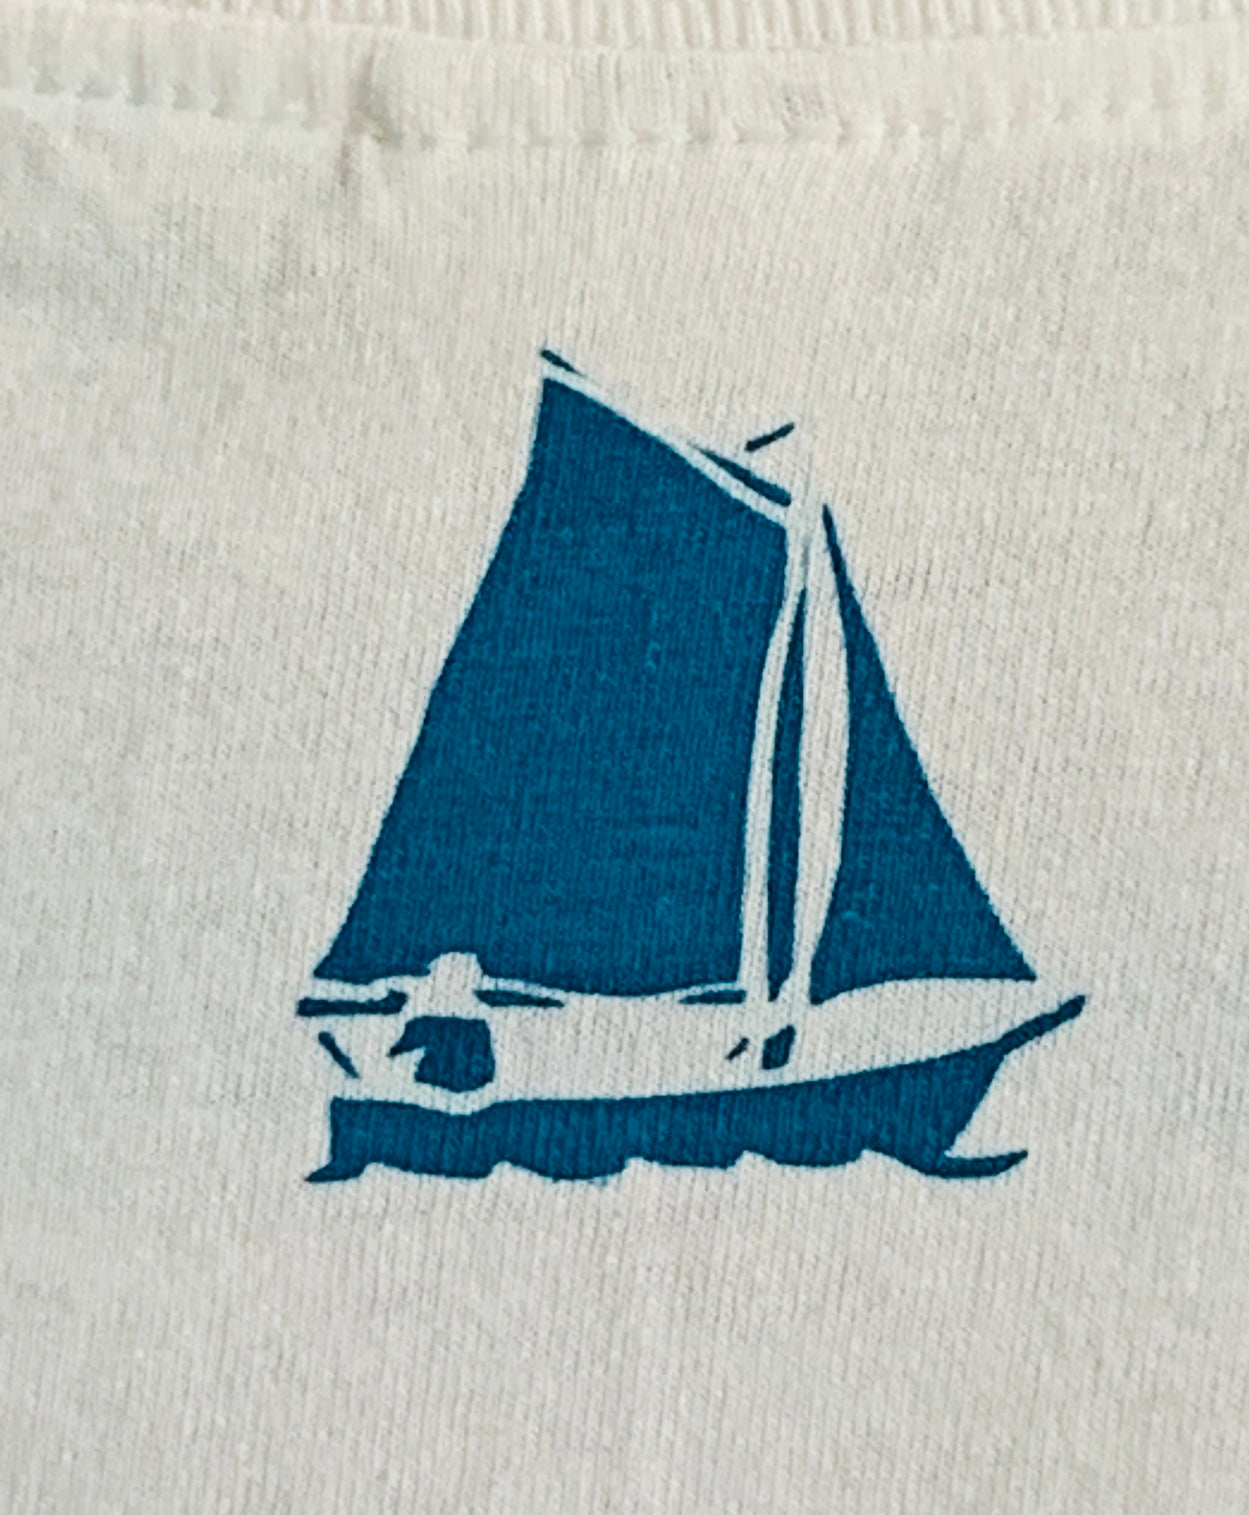 Detail of  turquoise blue boat design  on back of white t-shirt